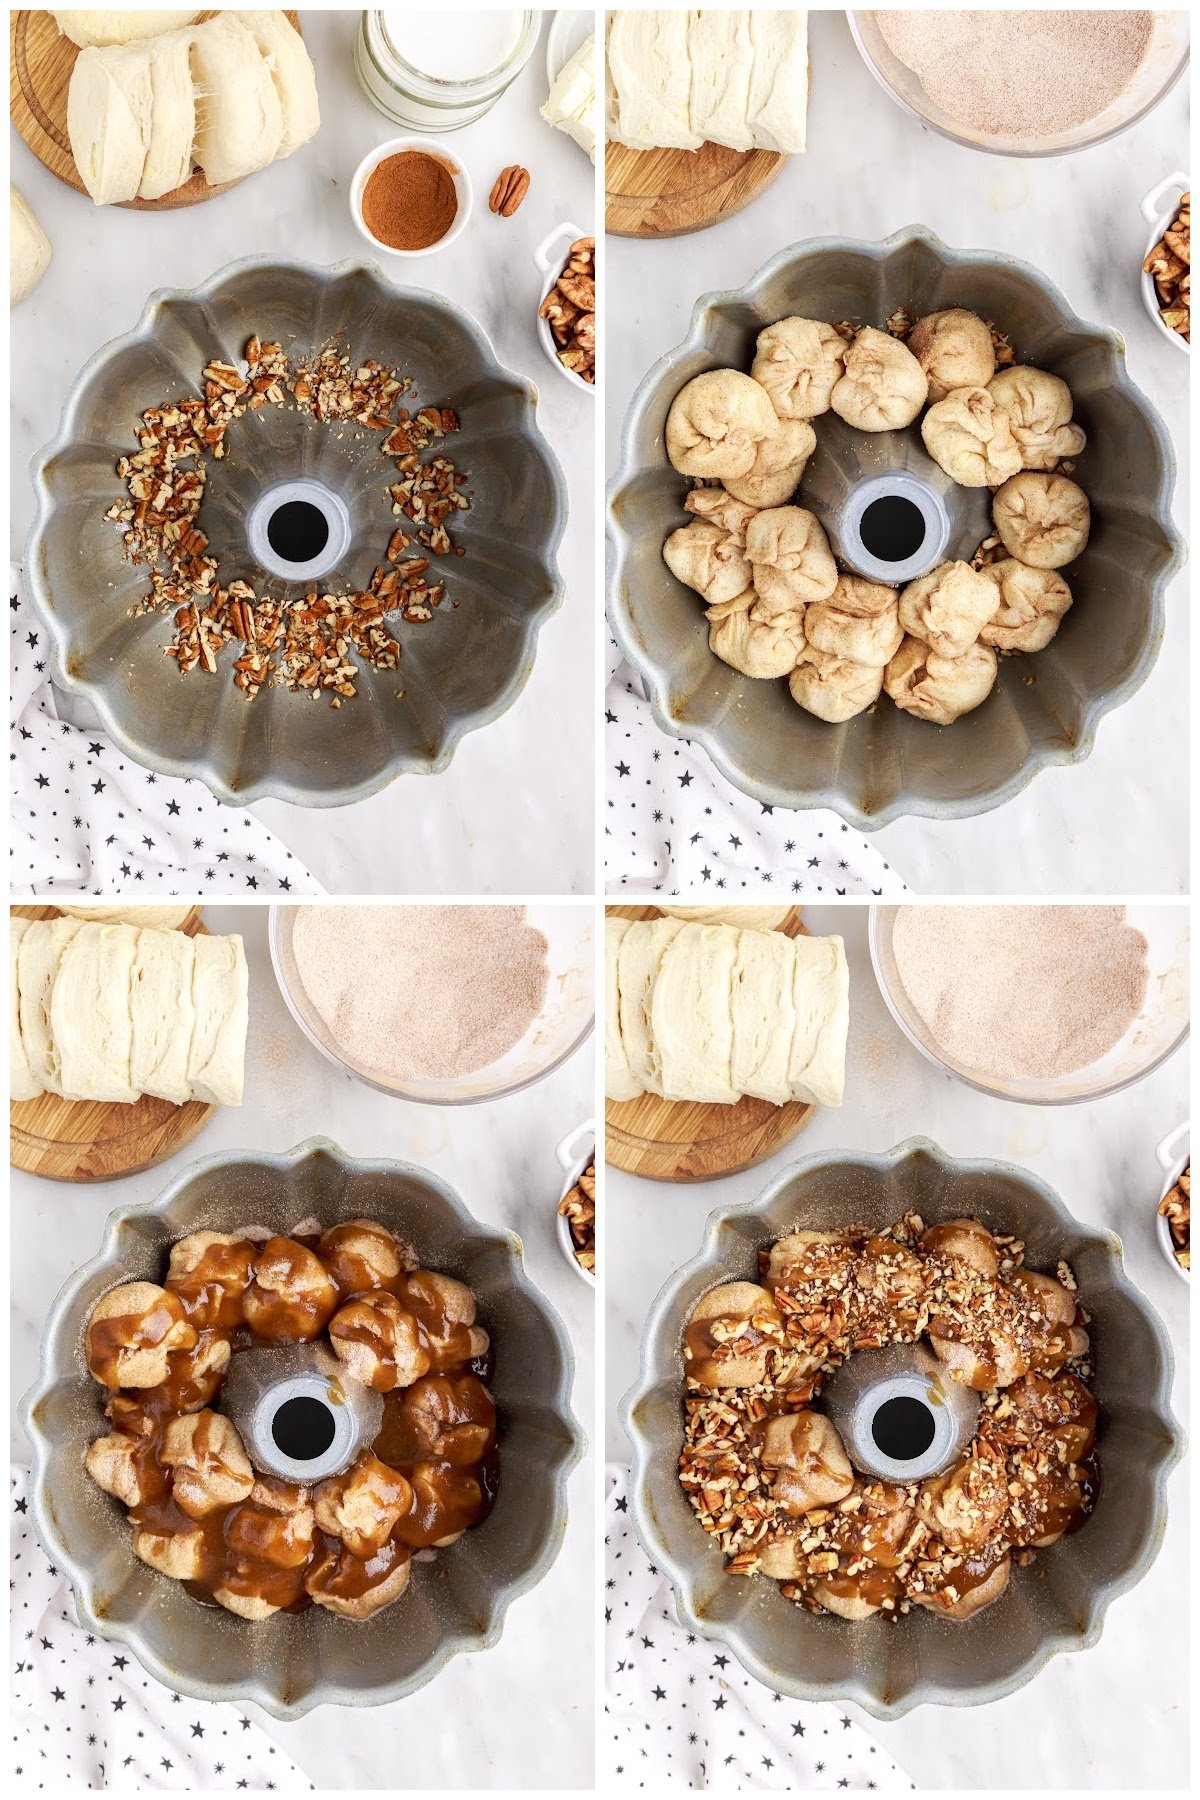 Showing 4 steps here including putting the nuts on the bottom of the bundt pan and putting rolled biscuits on top.